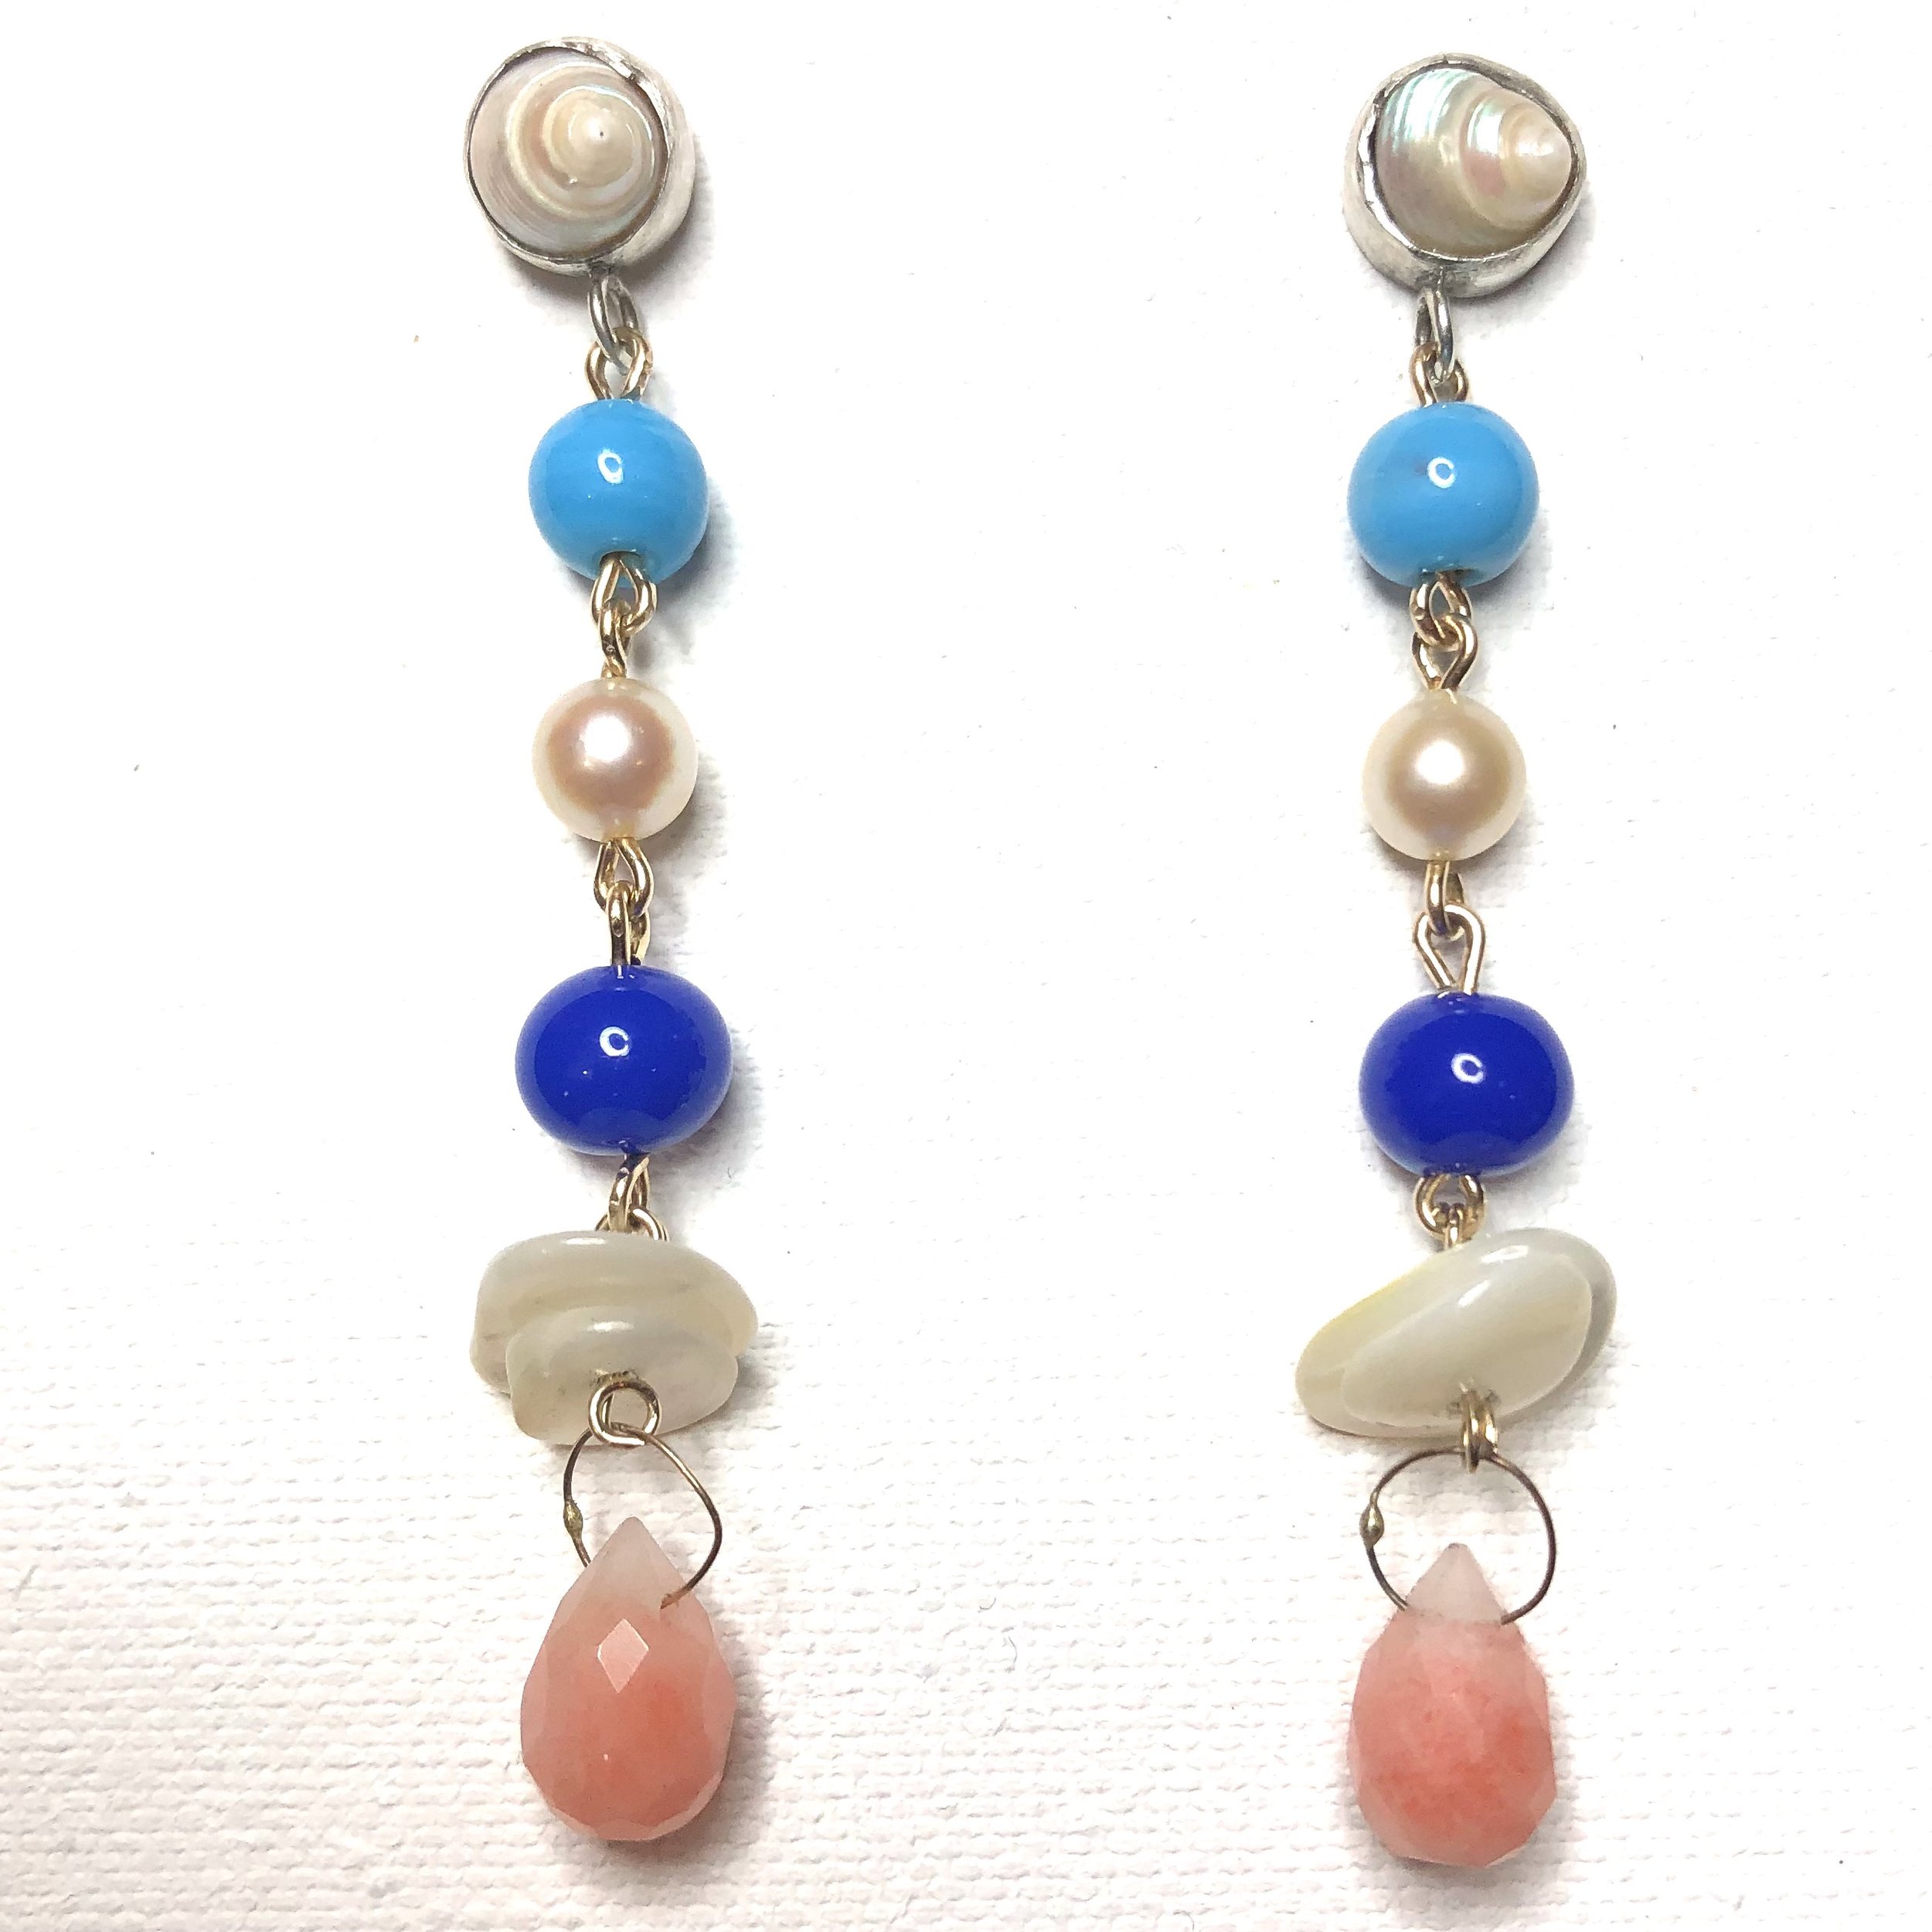  Earrings featuring mini shells, vintage glass bead, Pearl, vintage cobalt glass, mother of pearl, peach briolette 